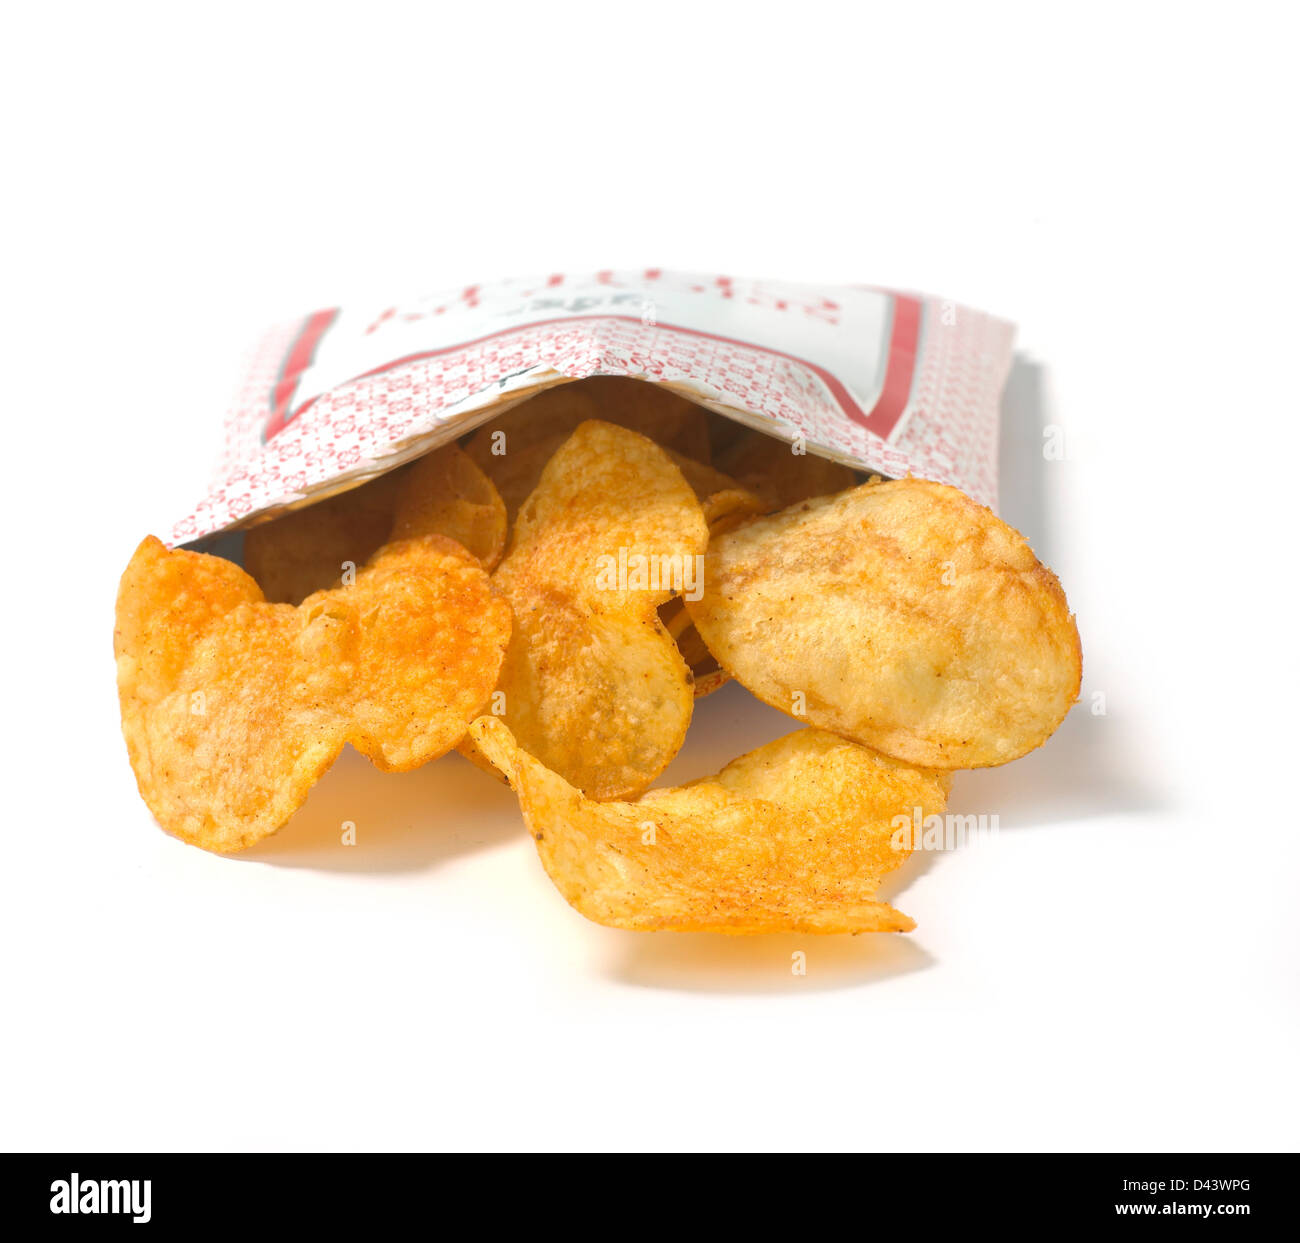 Opened packet of crisps cut out white background Stock Photo